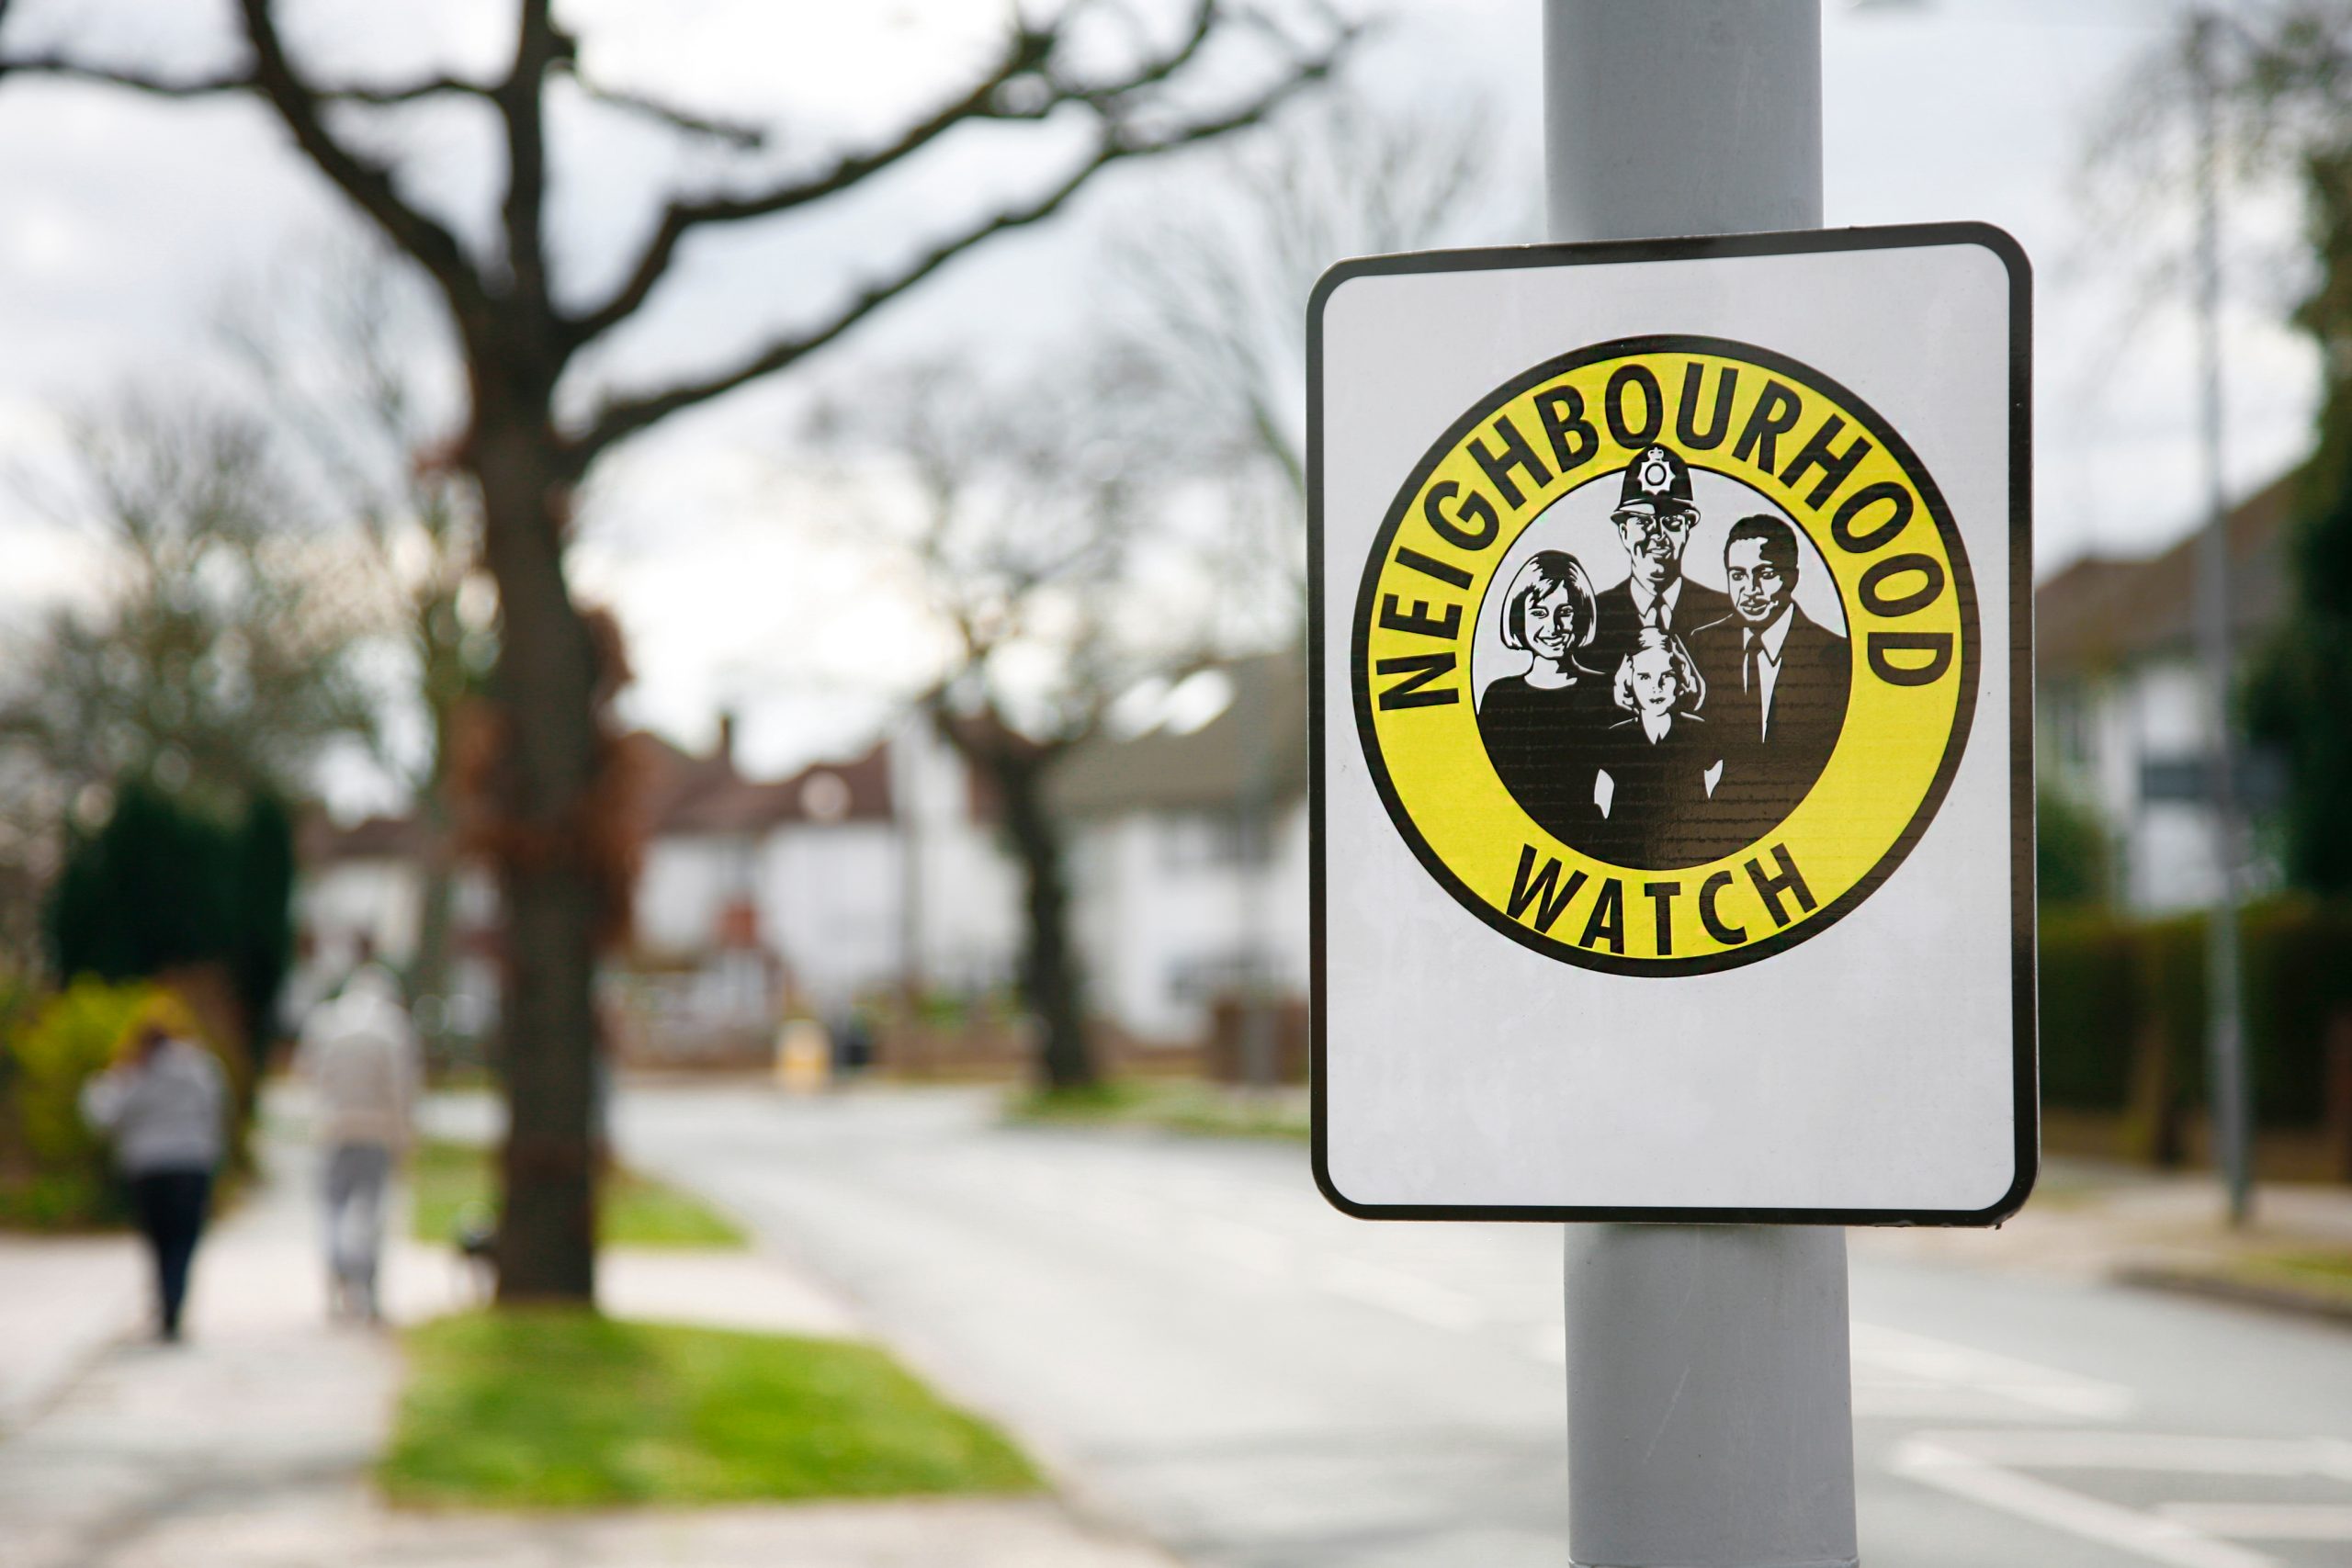 A yellow Neighbourhood watch sign on a lamp post in a residential area